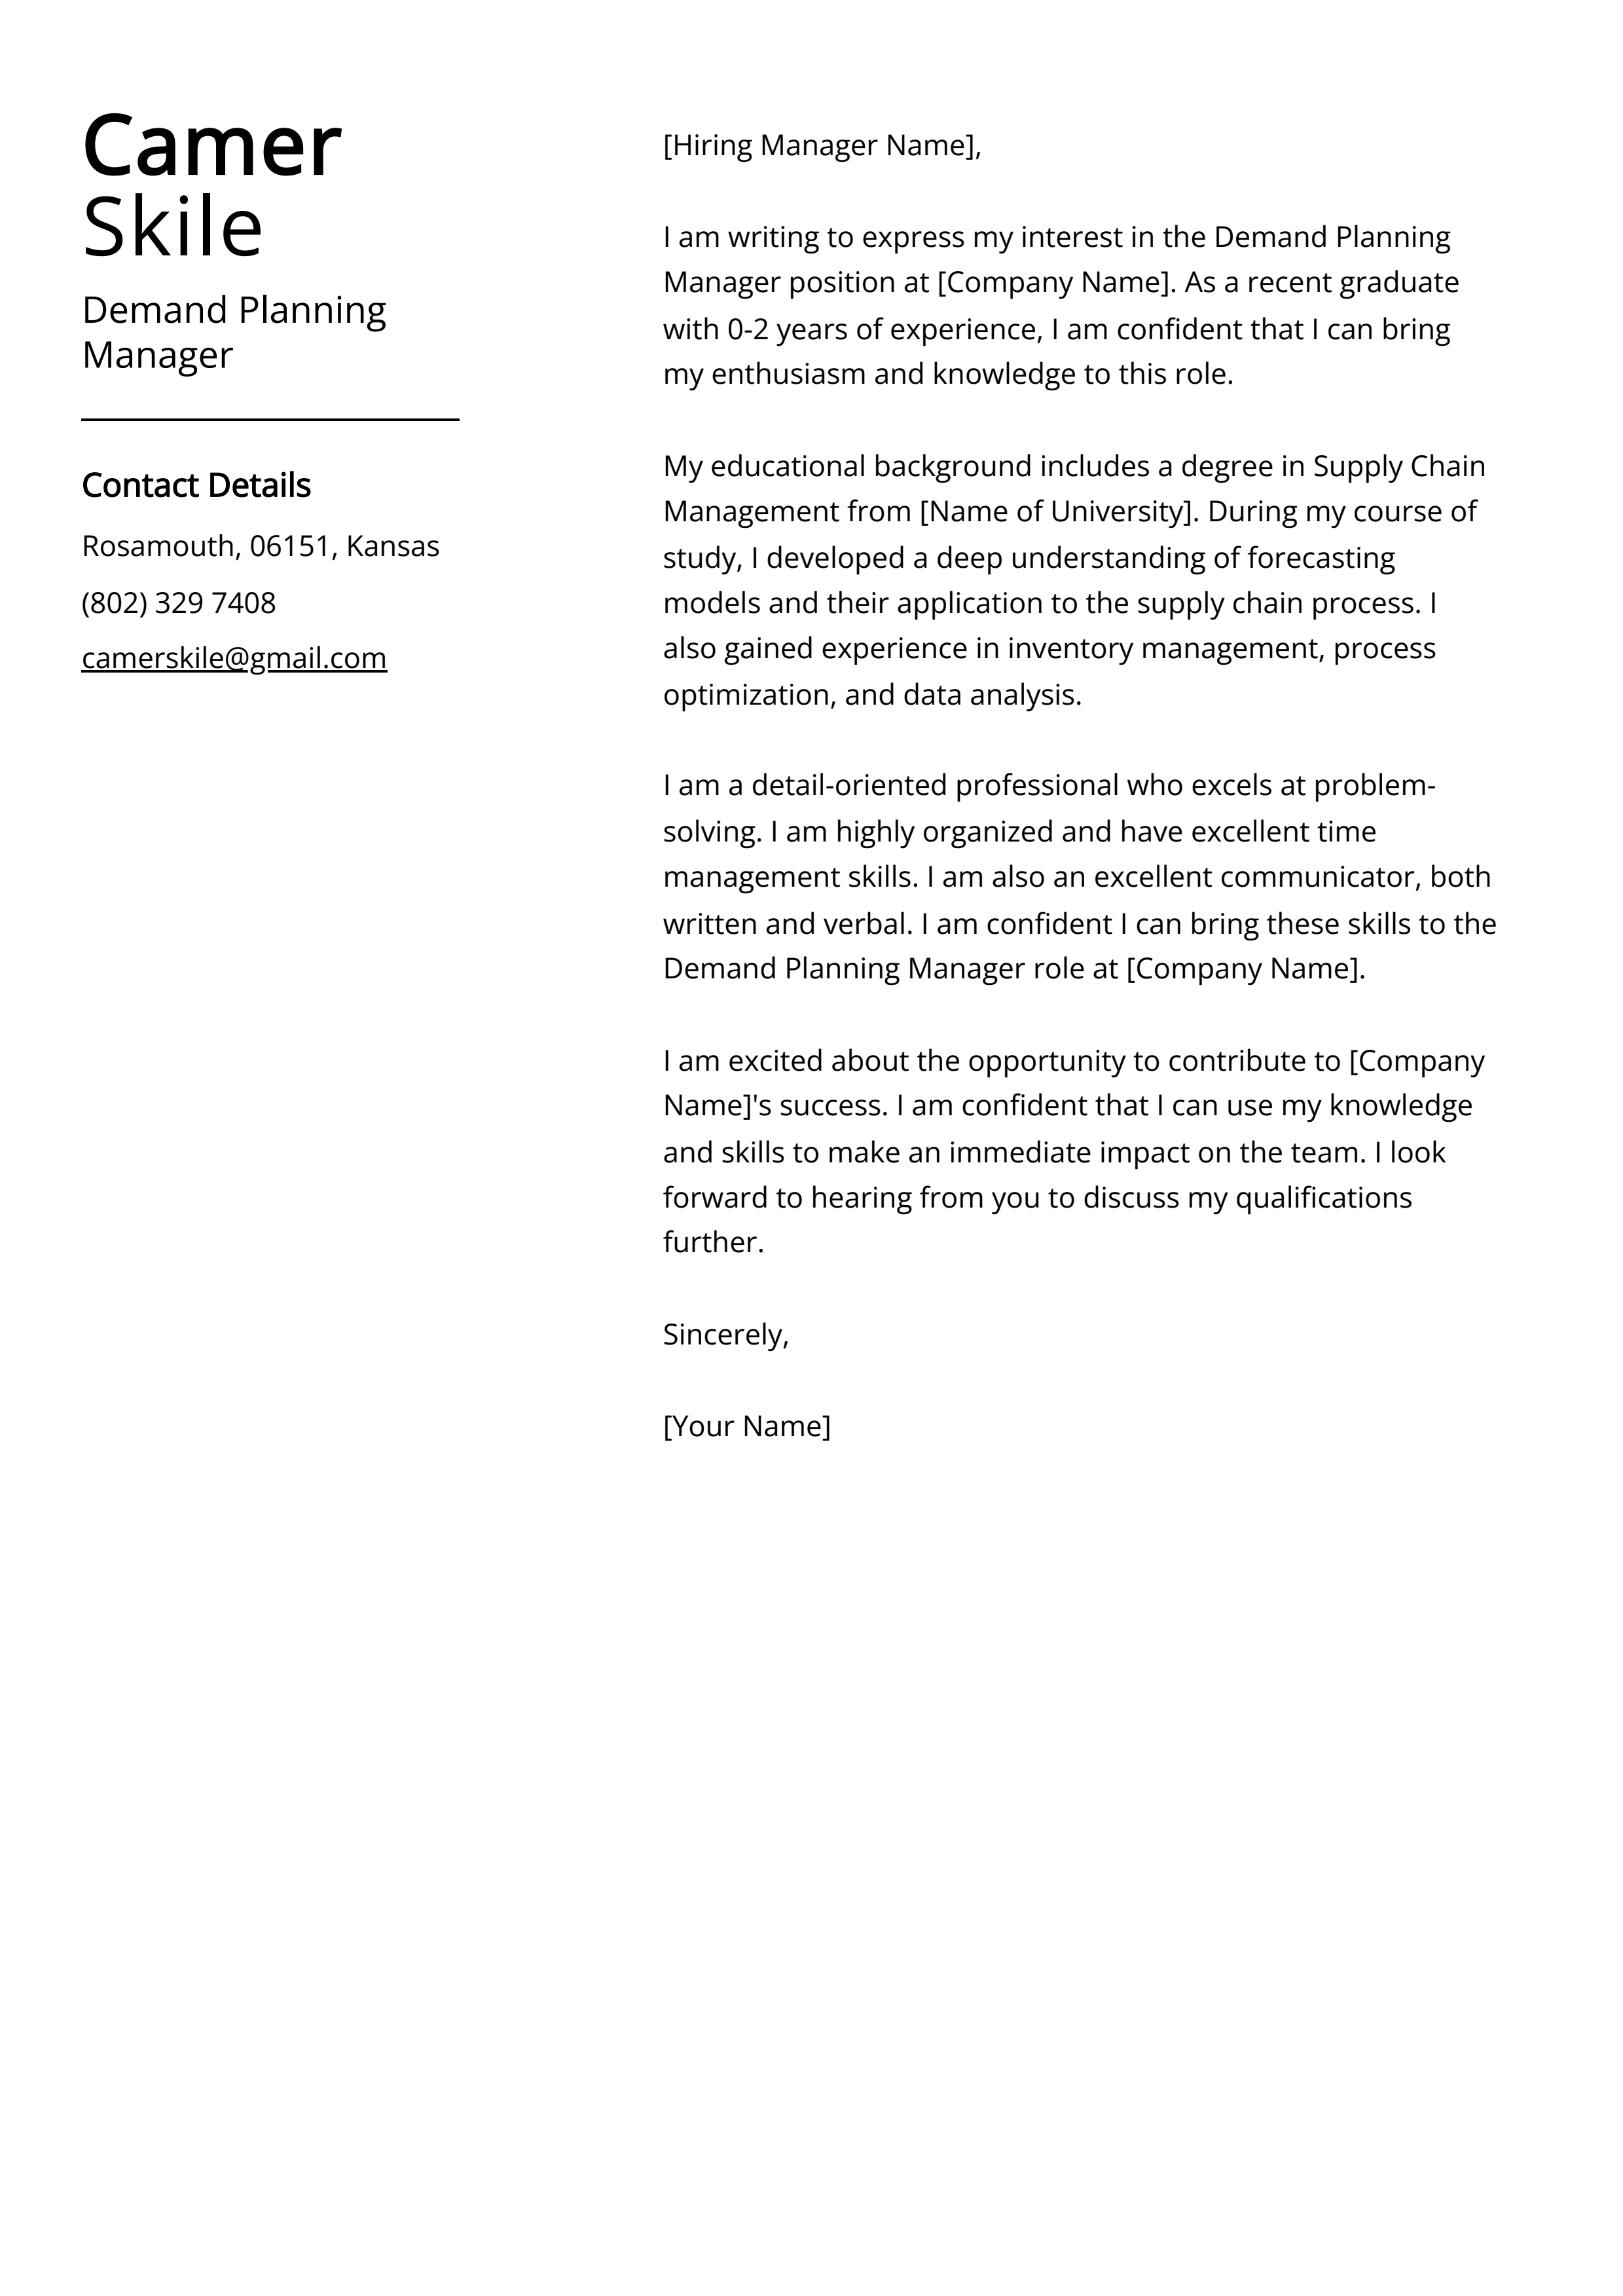 Demand Planning Manager Cover Letter Example